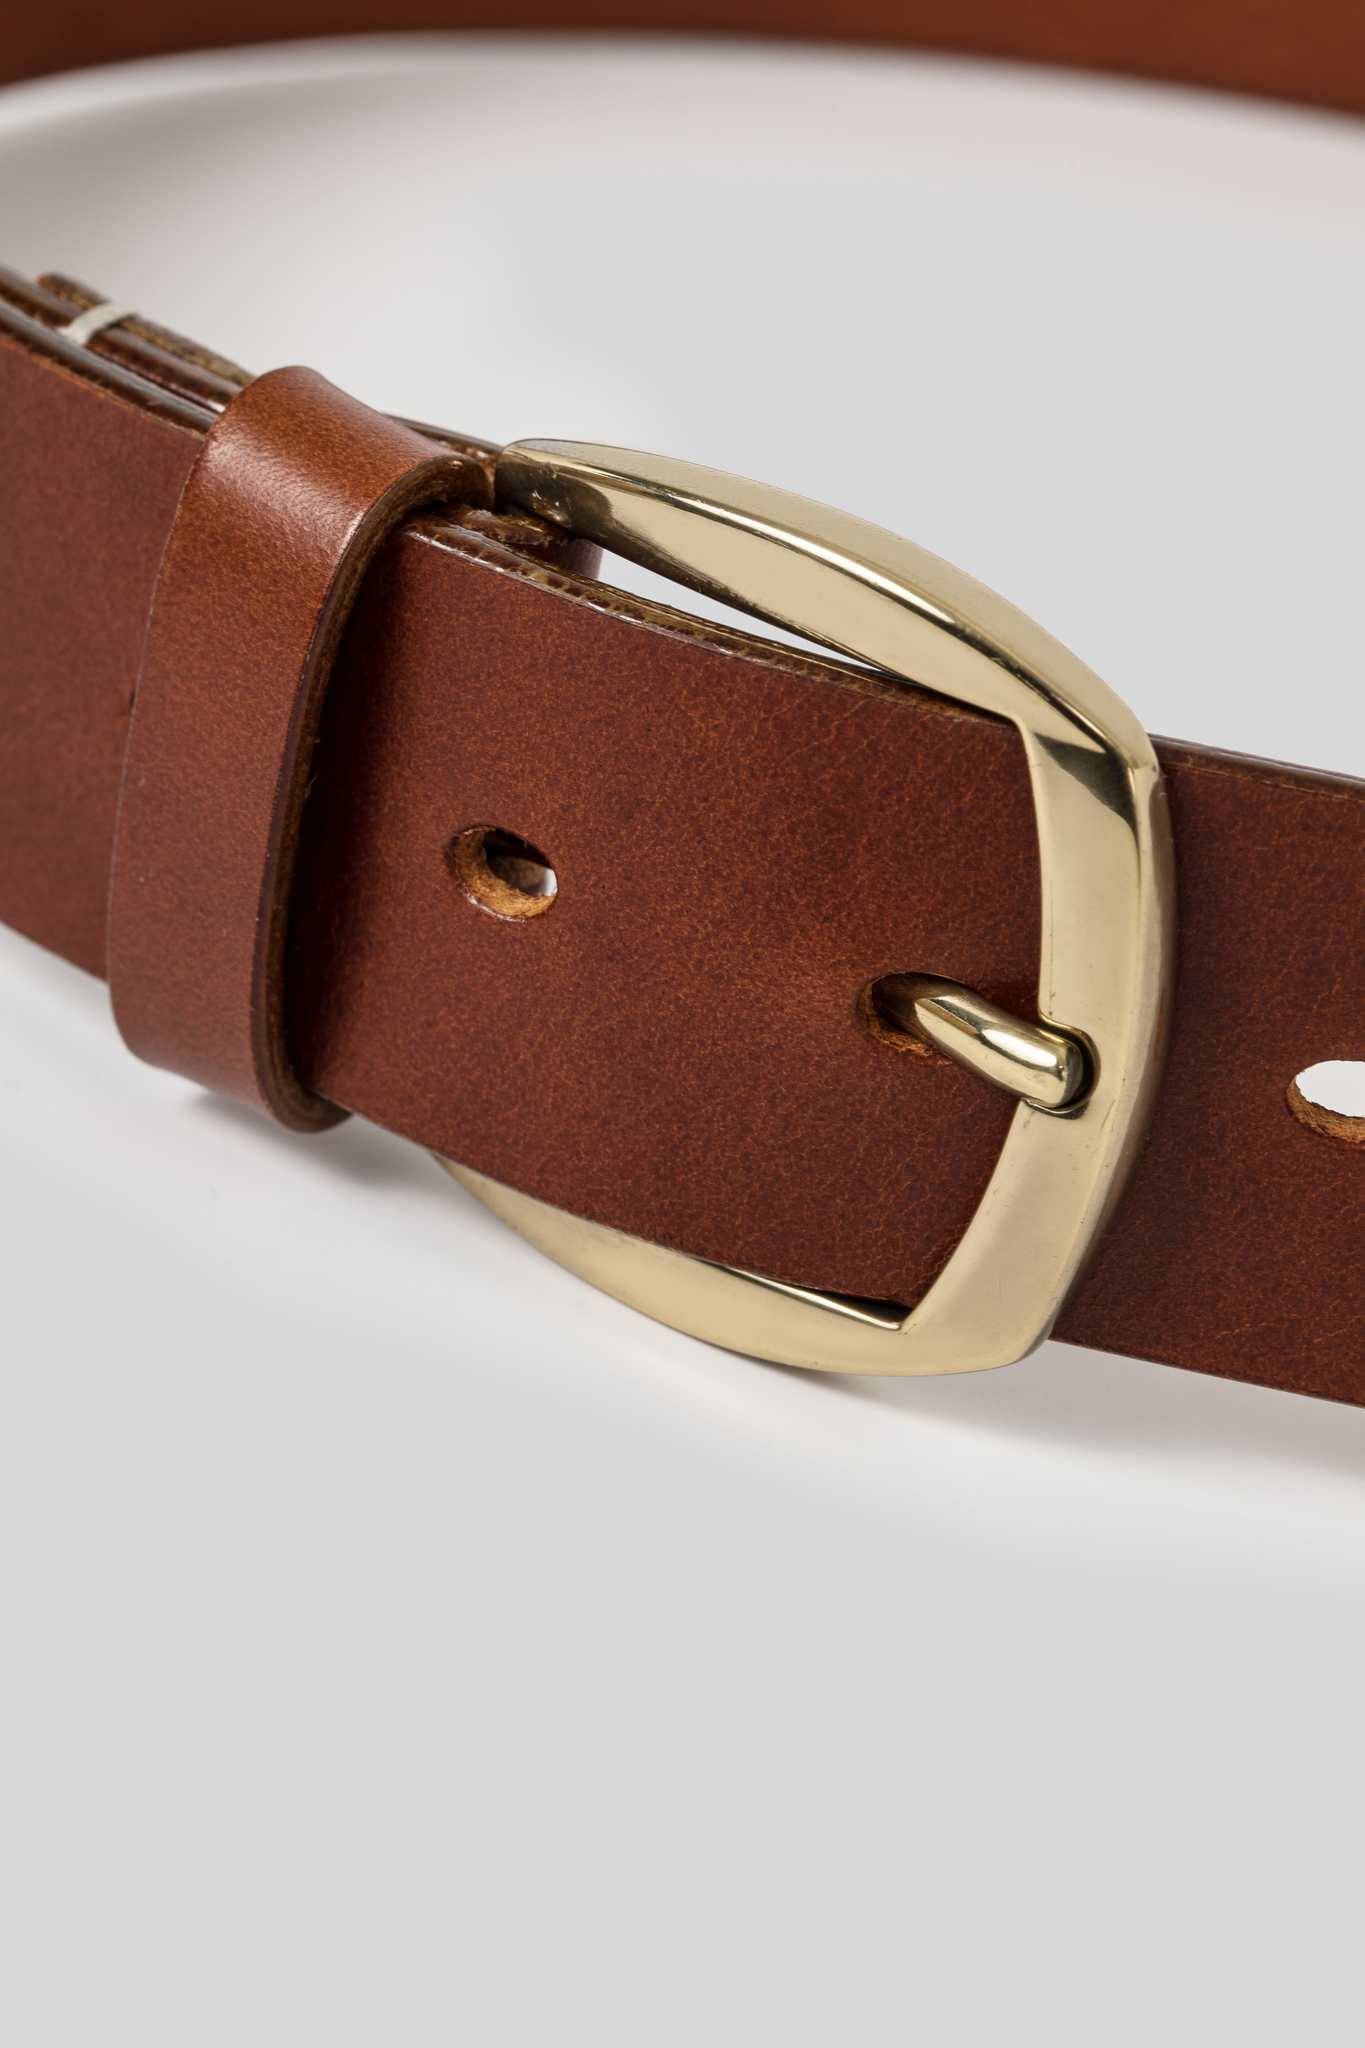 Basic Leather Belt - Casual Luxury Style - Solid Brass Buckle